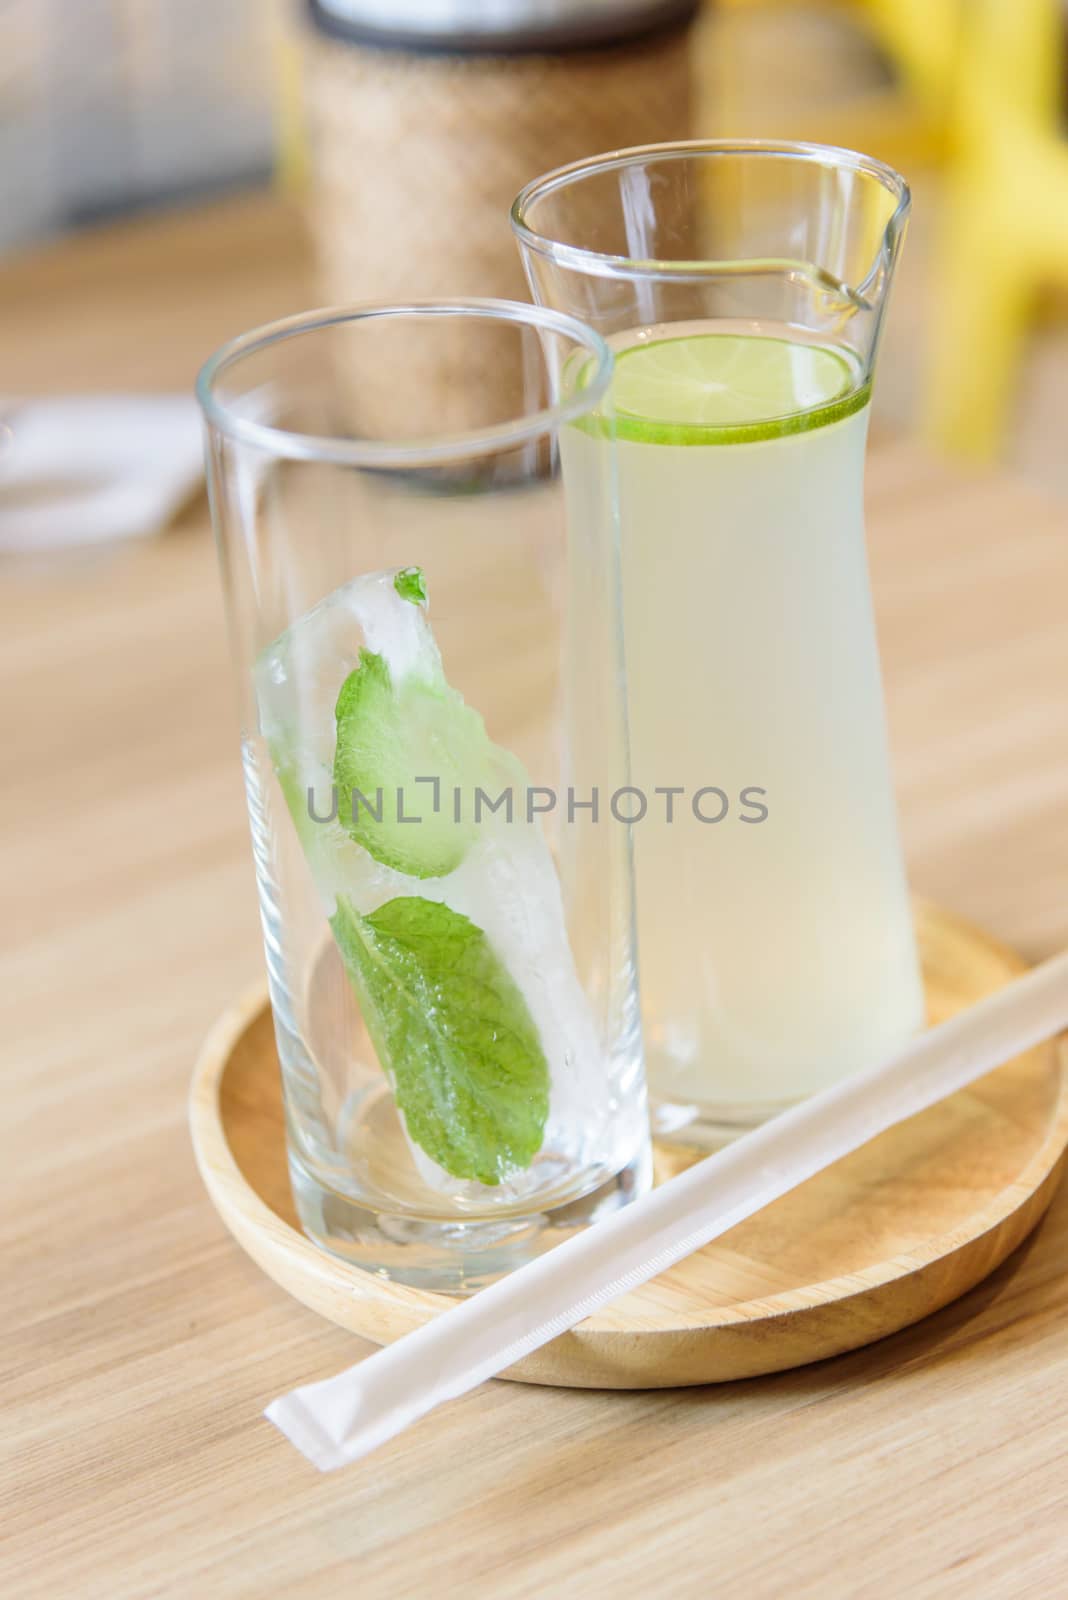 Lemon juice with ice Mint leaves bar in glass by rukawajung